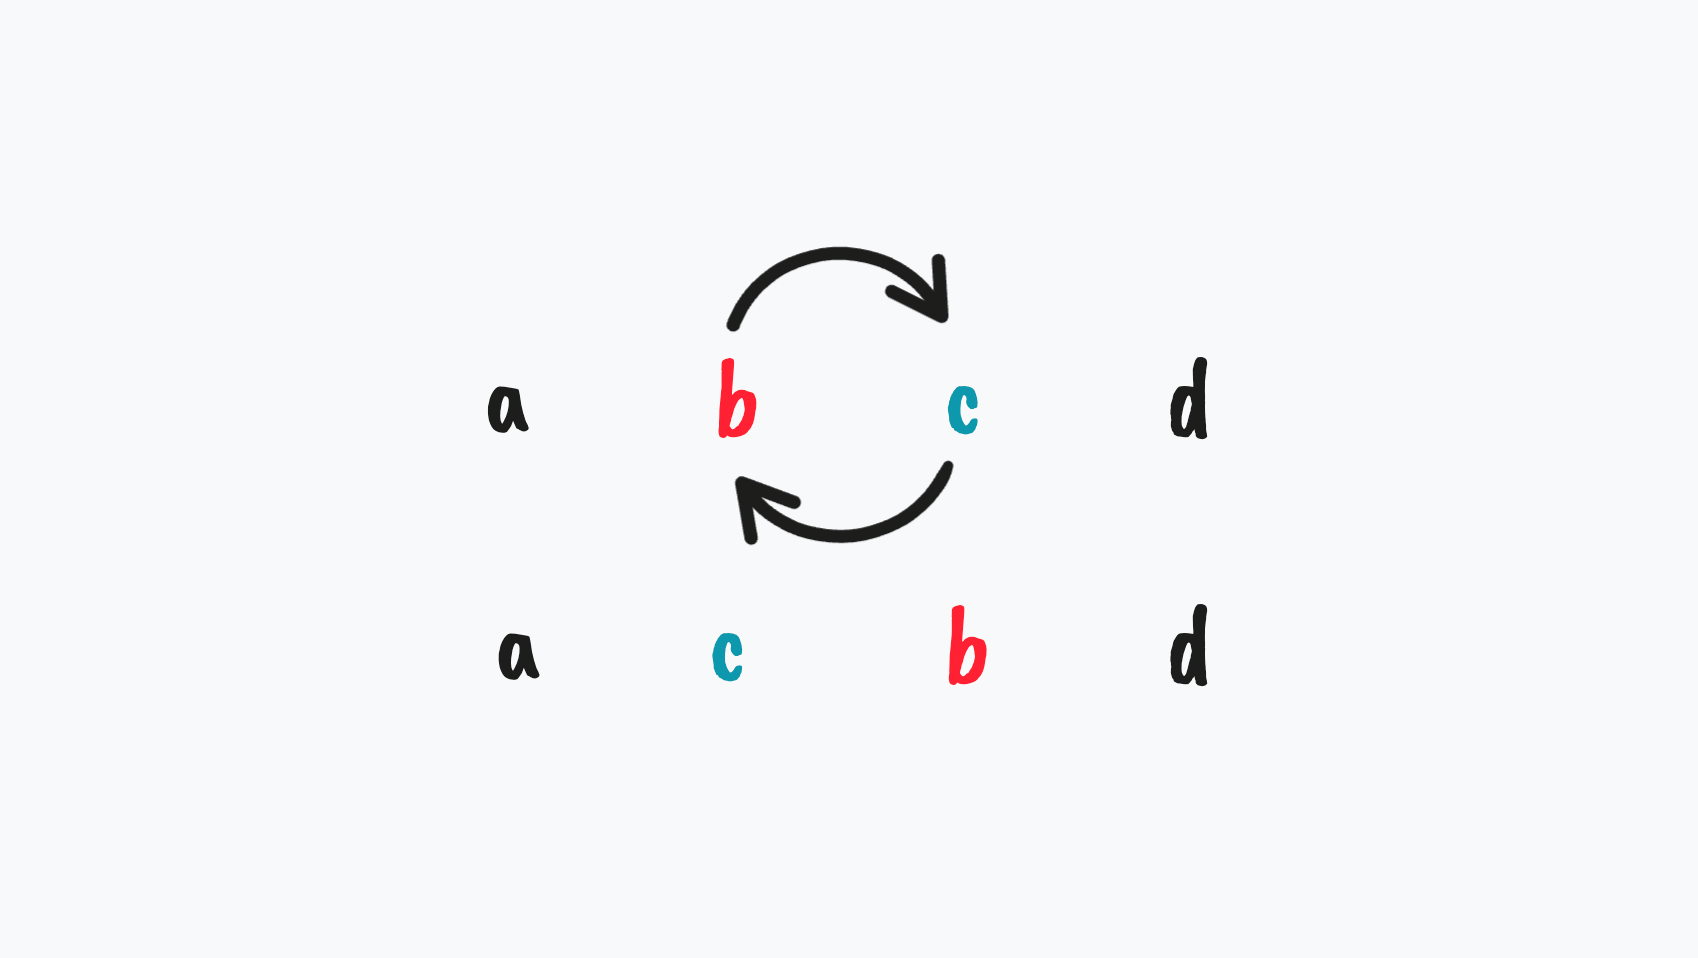 A diagram showing the result of moving b forward in items a, b, c, d.